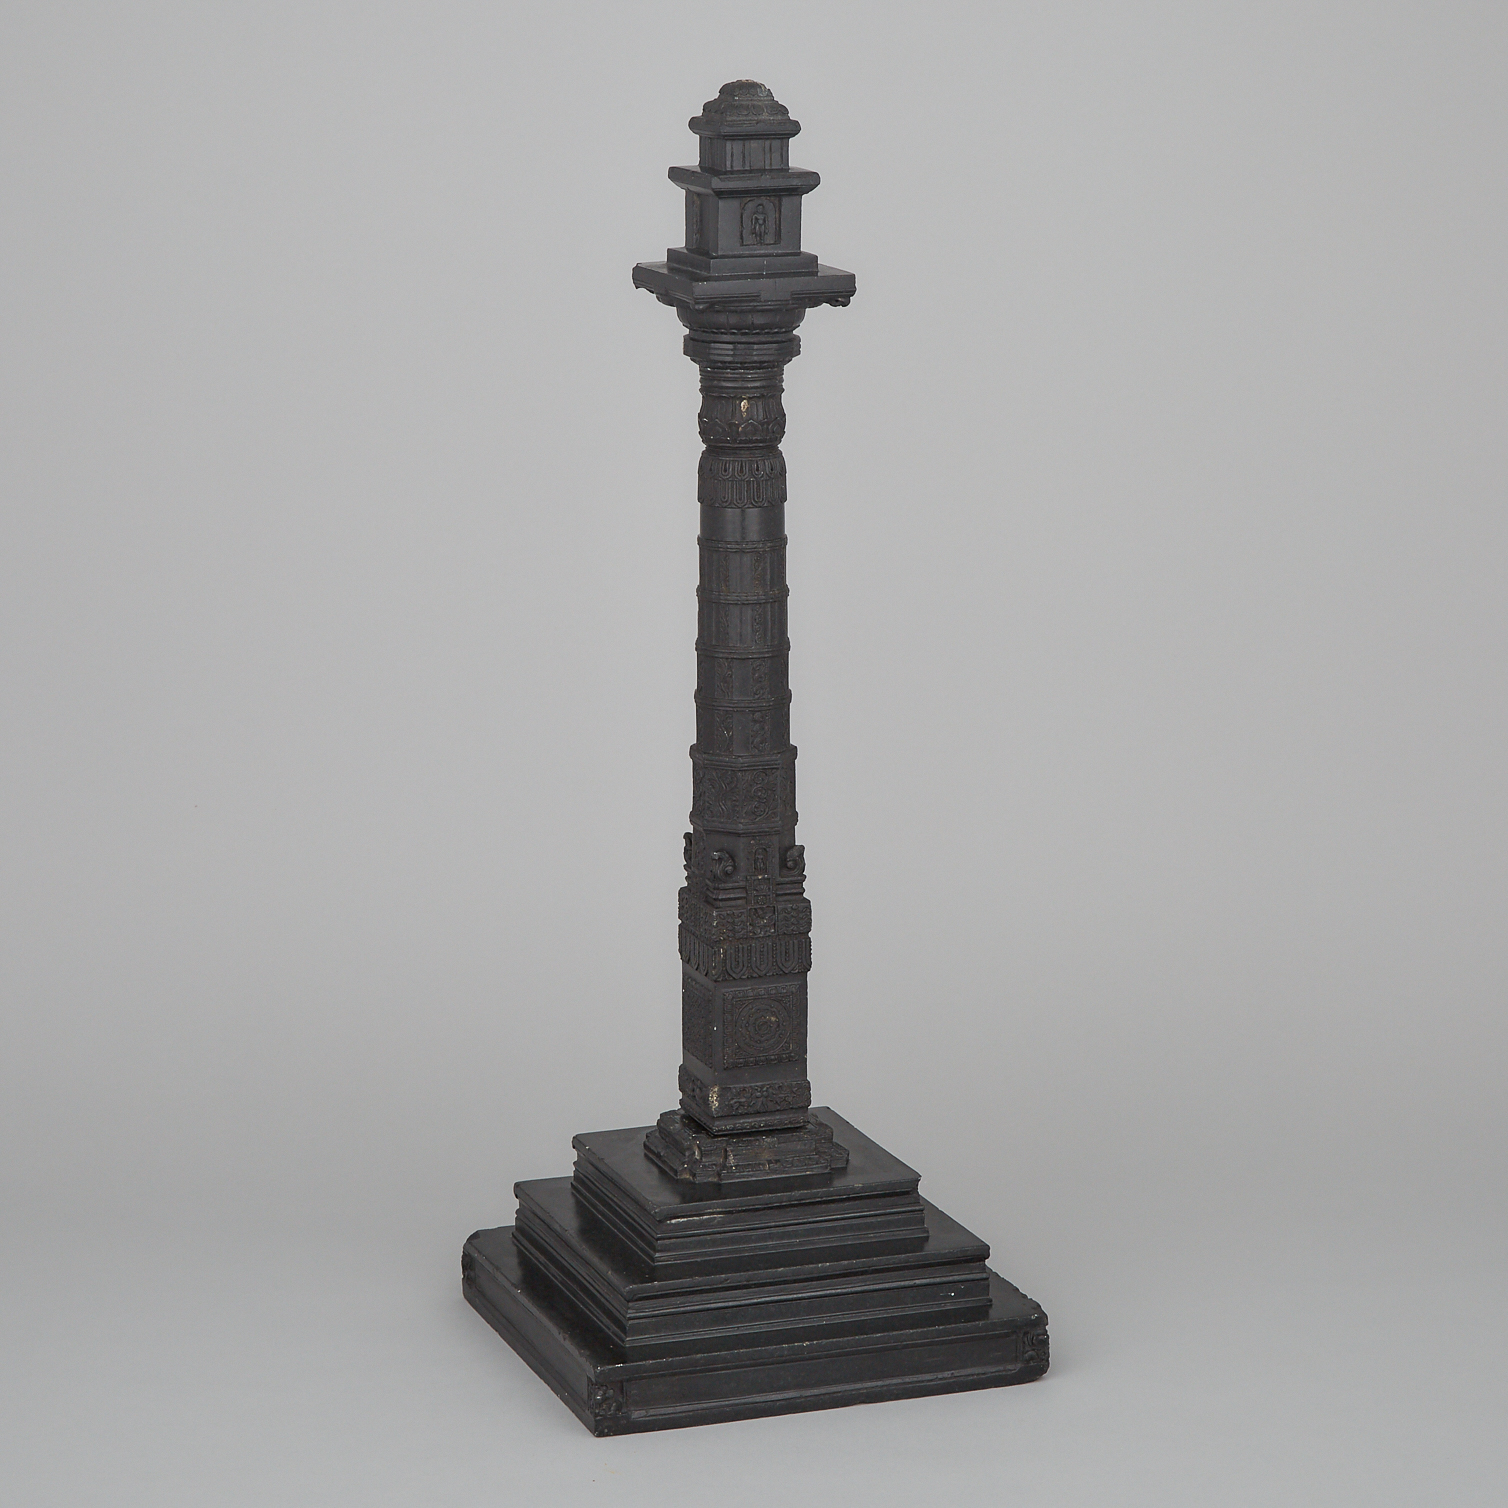 Indian Basalt Model of a Column Monument, 19th/early 20th century